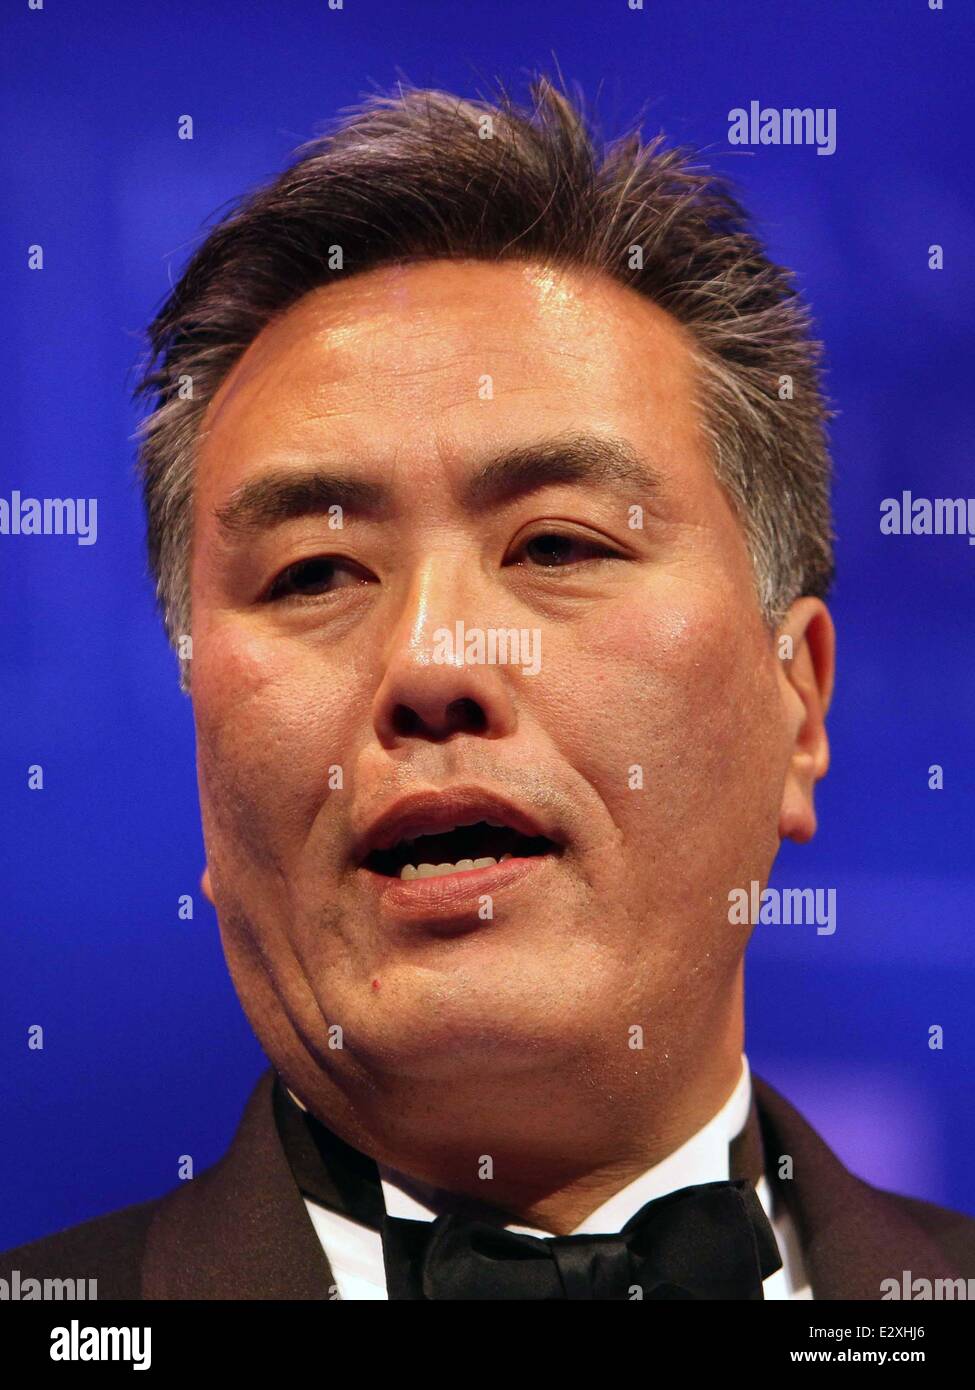 2013 Human Rights Campaign Annual Gala  Featuring: Mark Takano Where: Los Angeles, California, United States When: 23 Mar 2013 C